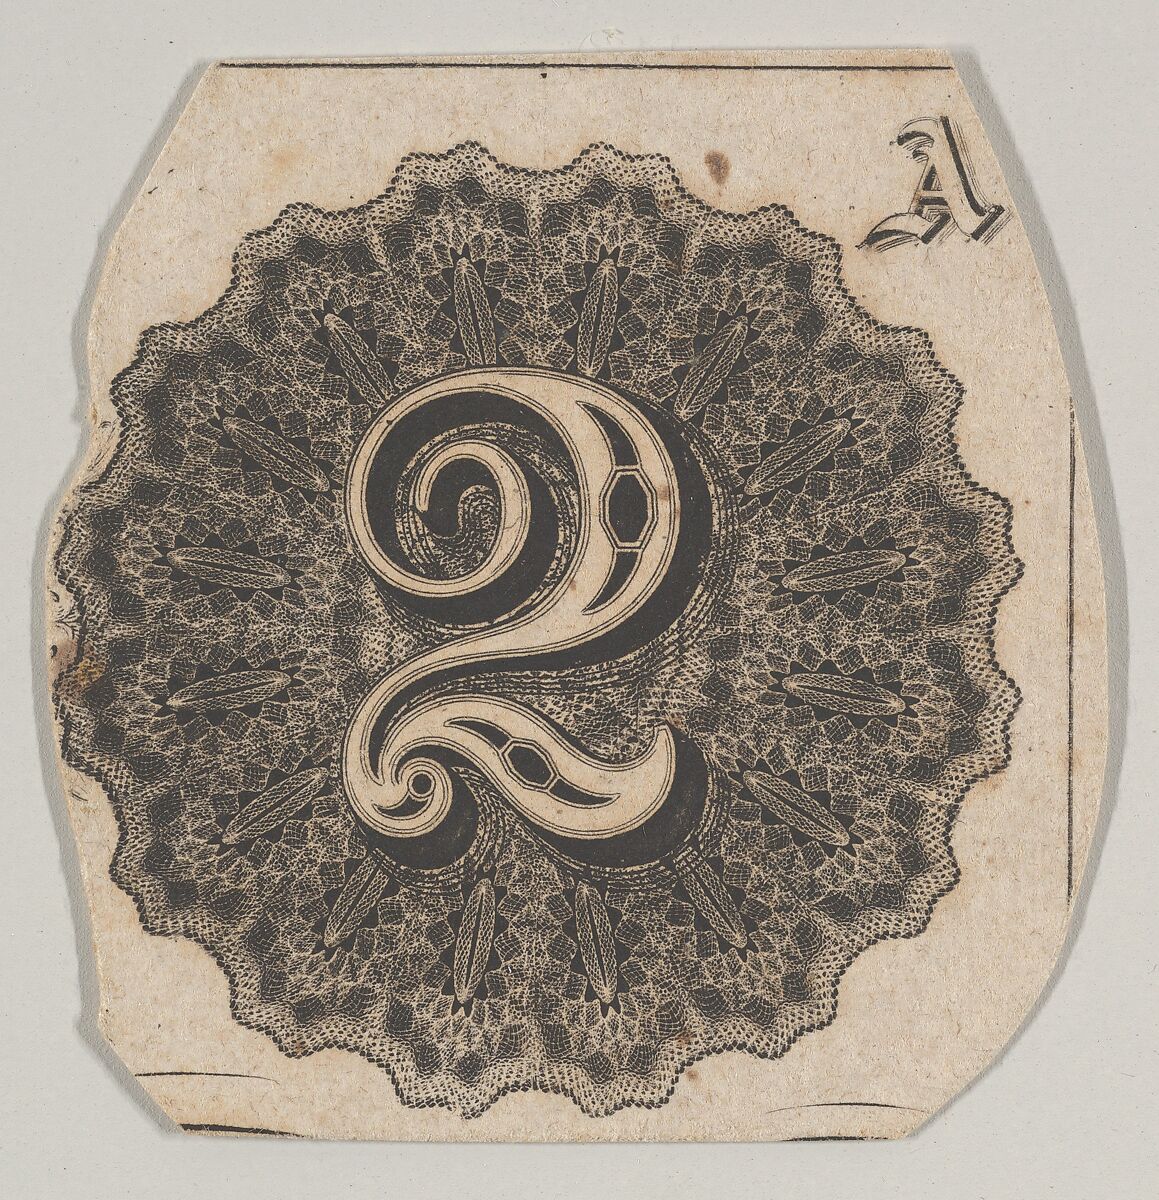 Banknote motif: number 2 against a circular panel of lathe work with a scalloped edge, Associated with Cyrus Durand (American, 1787–1868), Engraving; proof 